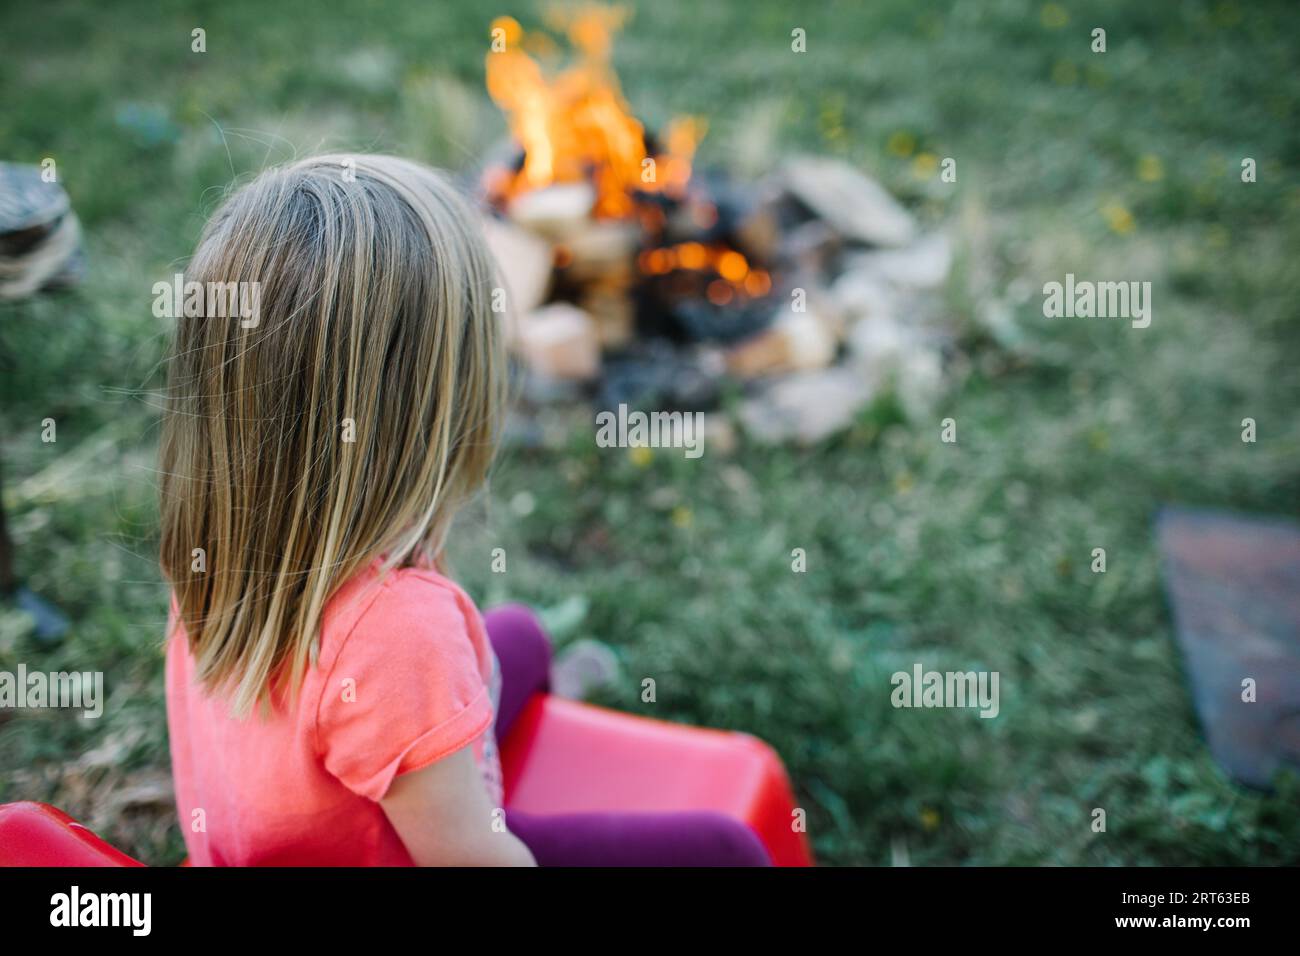 Toddler in red chair awaits s’mores by campfire. Stock Photo